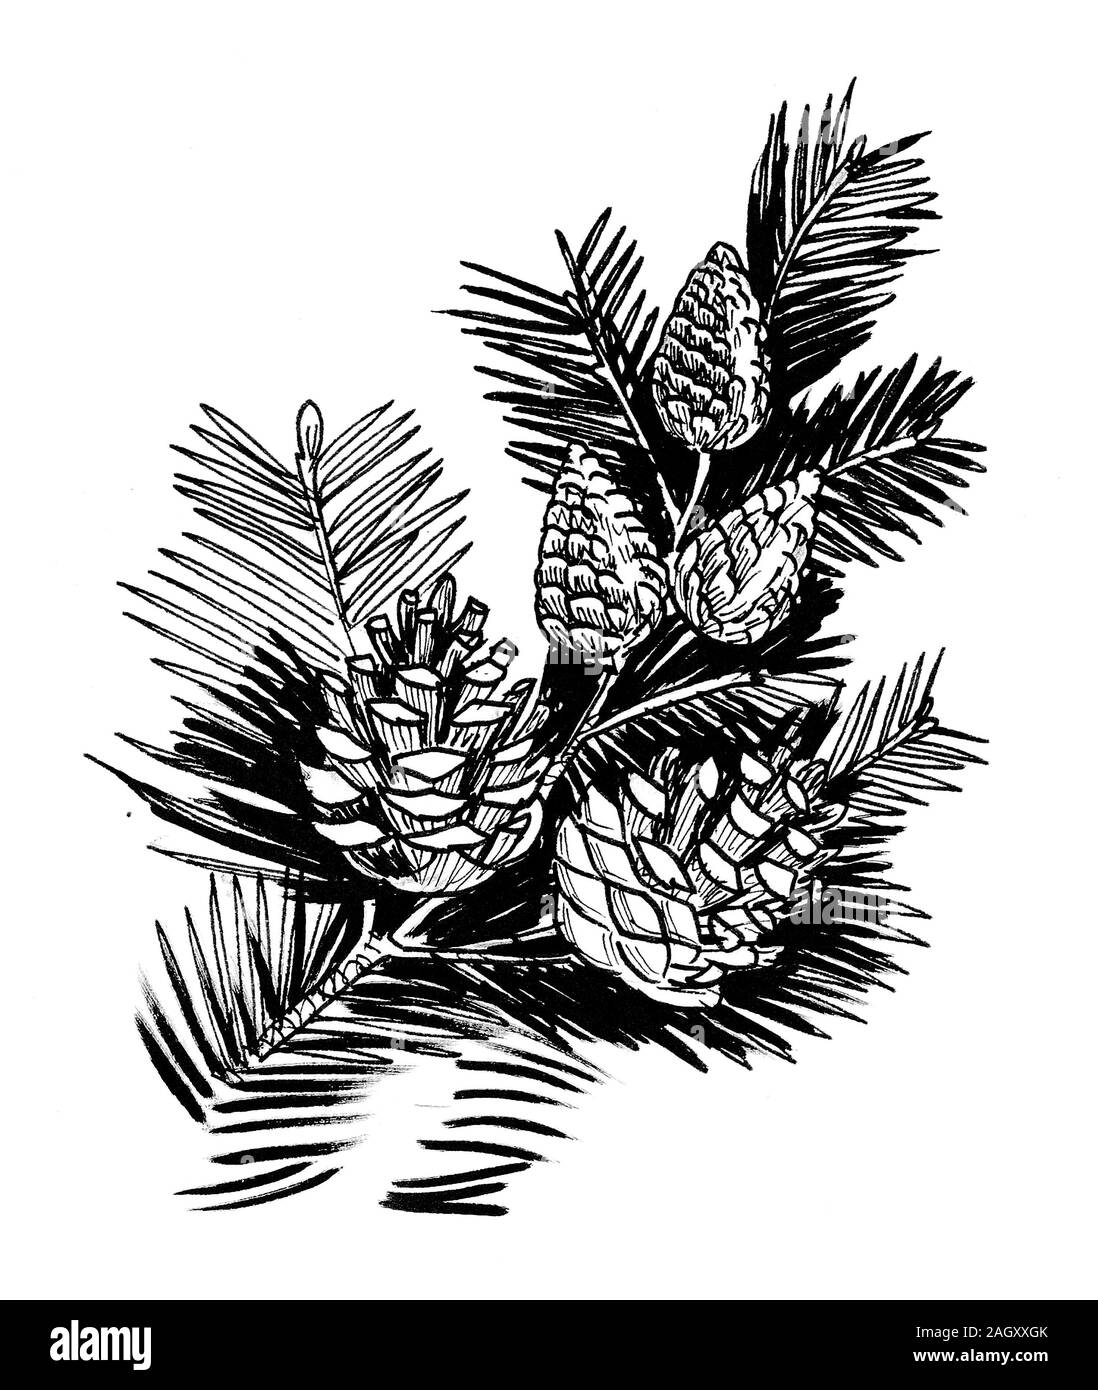 Pin tree branches with cones. Ink black and white drawing Stock Photo